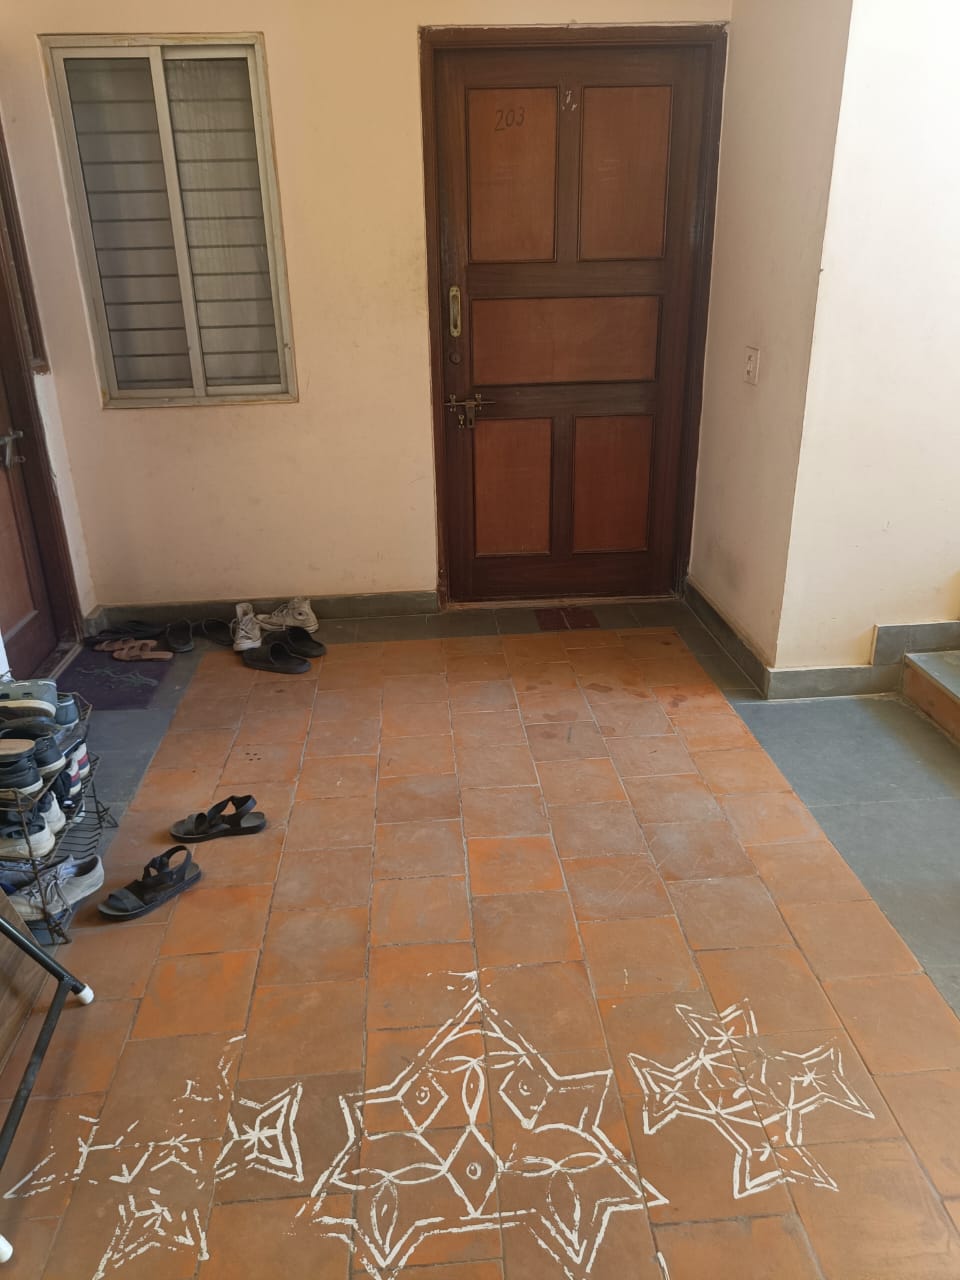 2 BHK Independent House for Lease Only at JAML2 - 2568 in Kammasandra village